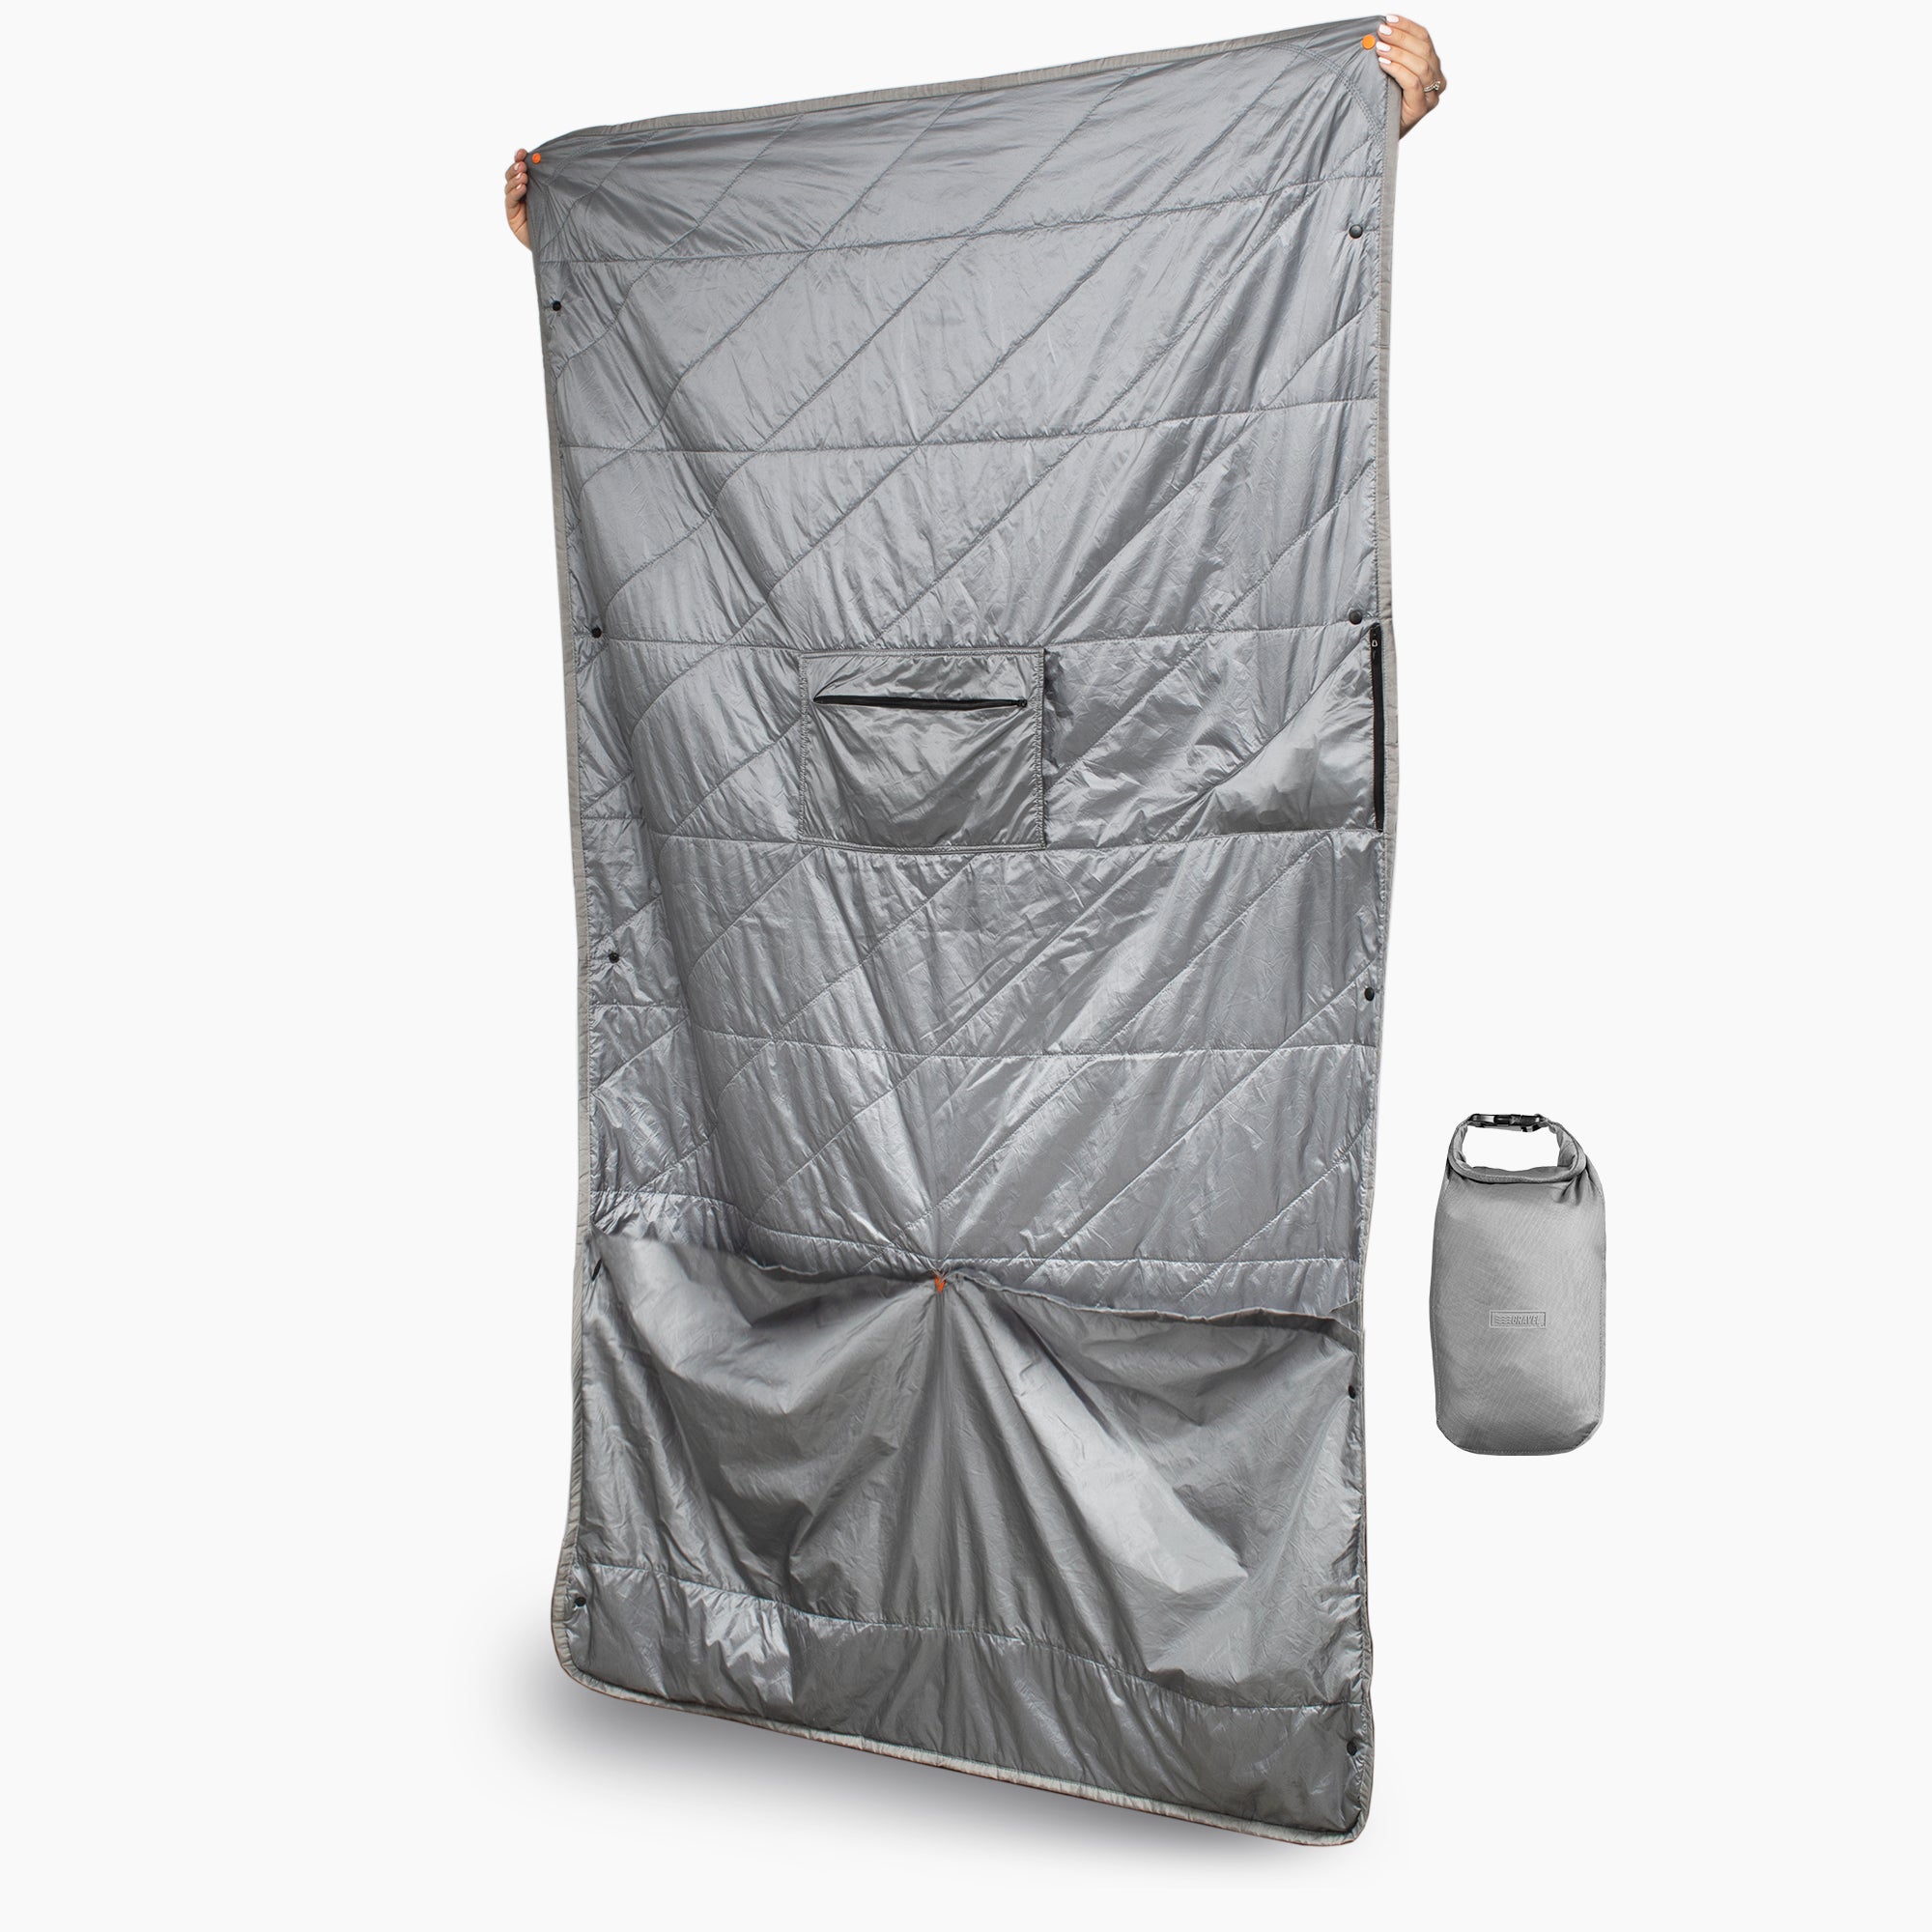 Garage Sale | Gray Layover™ Travel Blanket - Packable & Insulated